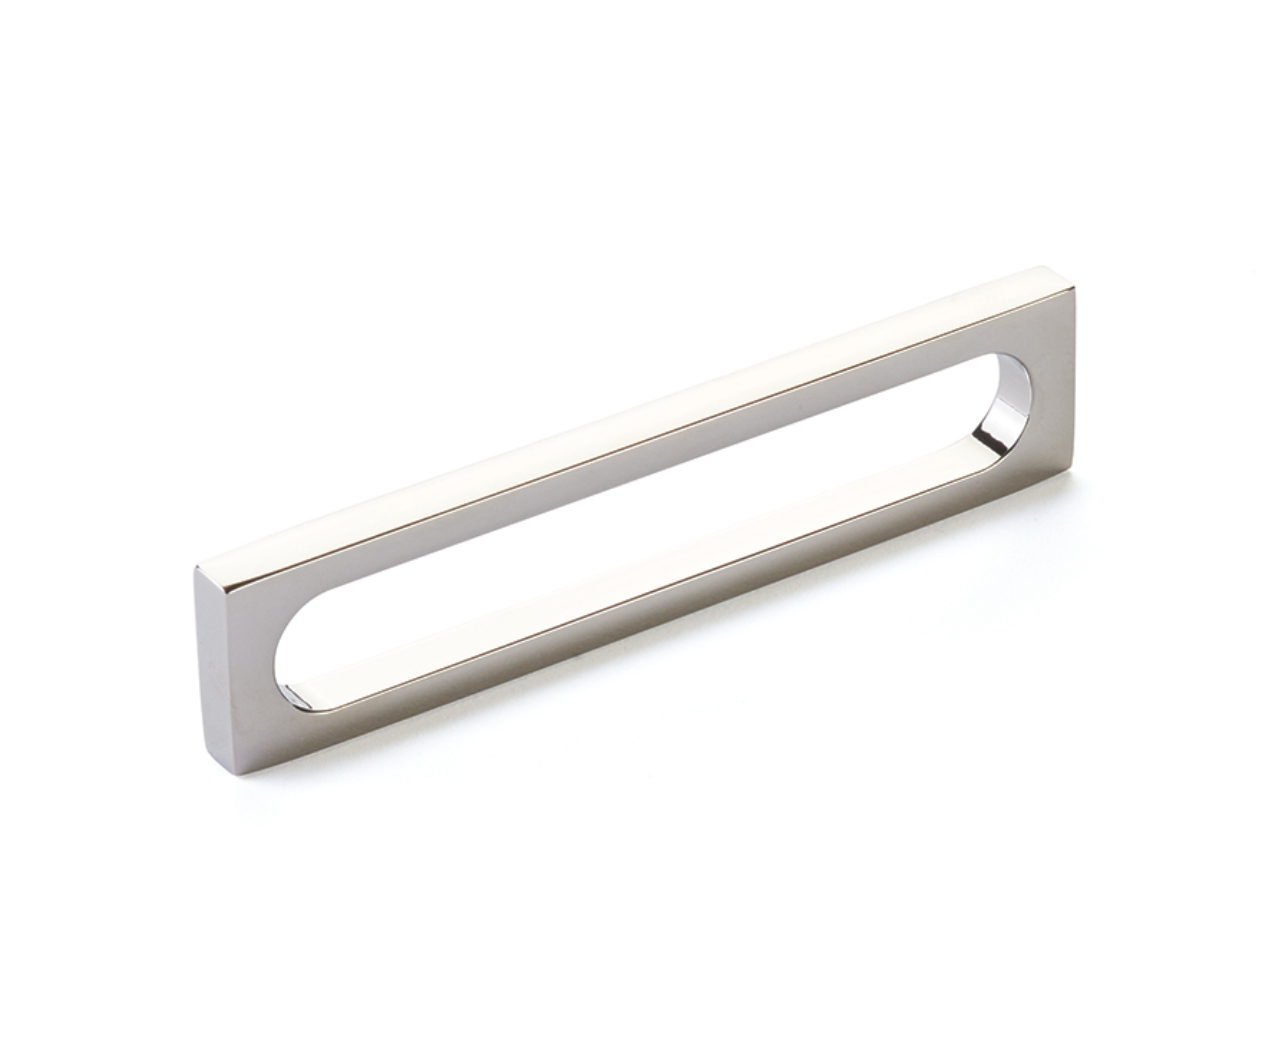 Polished Nickel "Loop" Square Drawer Pulls and Cabinet Knobs - Industry Hardware